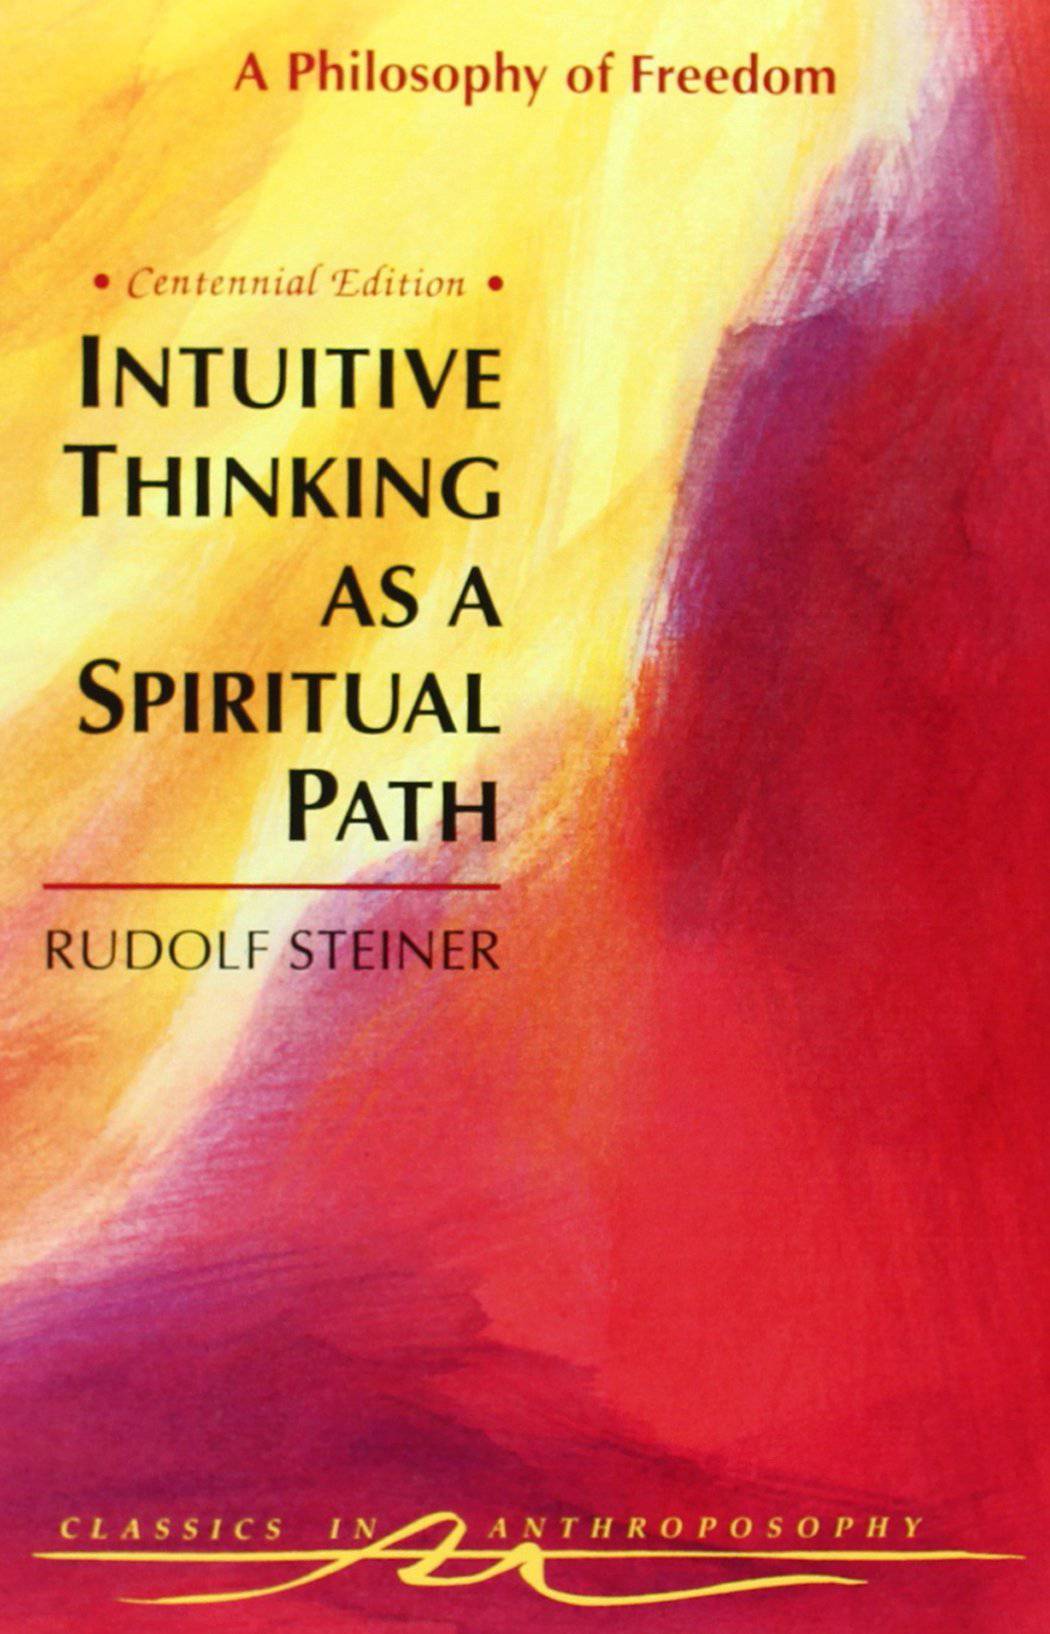 Intuitive Thinking as a Spiritual Path: A Philosophy of Freedom by Rudolf Steiner, The Centennial Edition - The Josephine Porter Institute